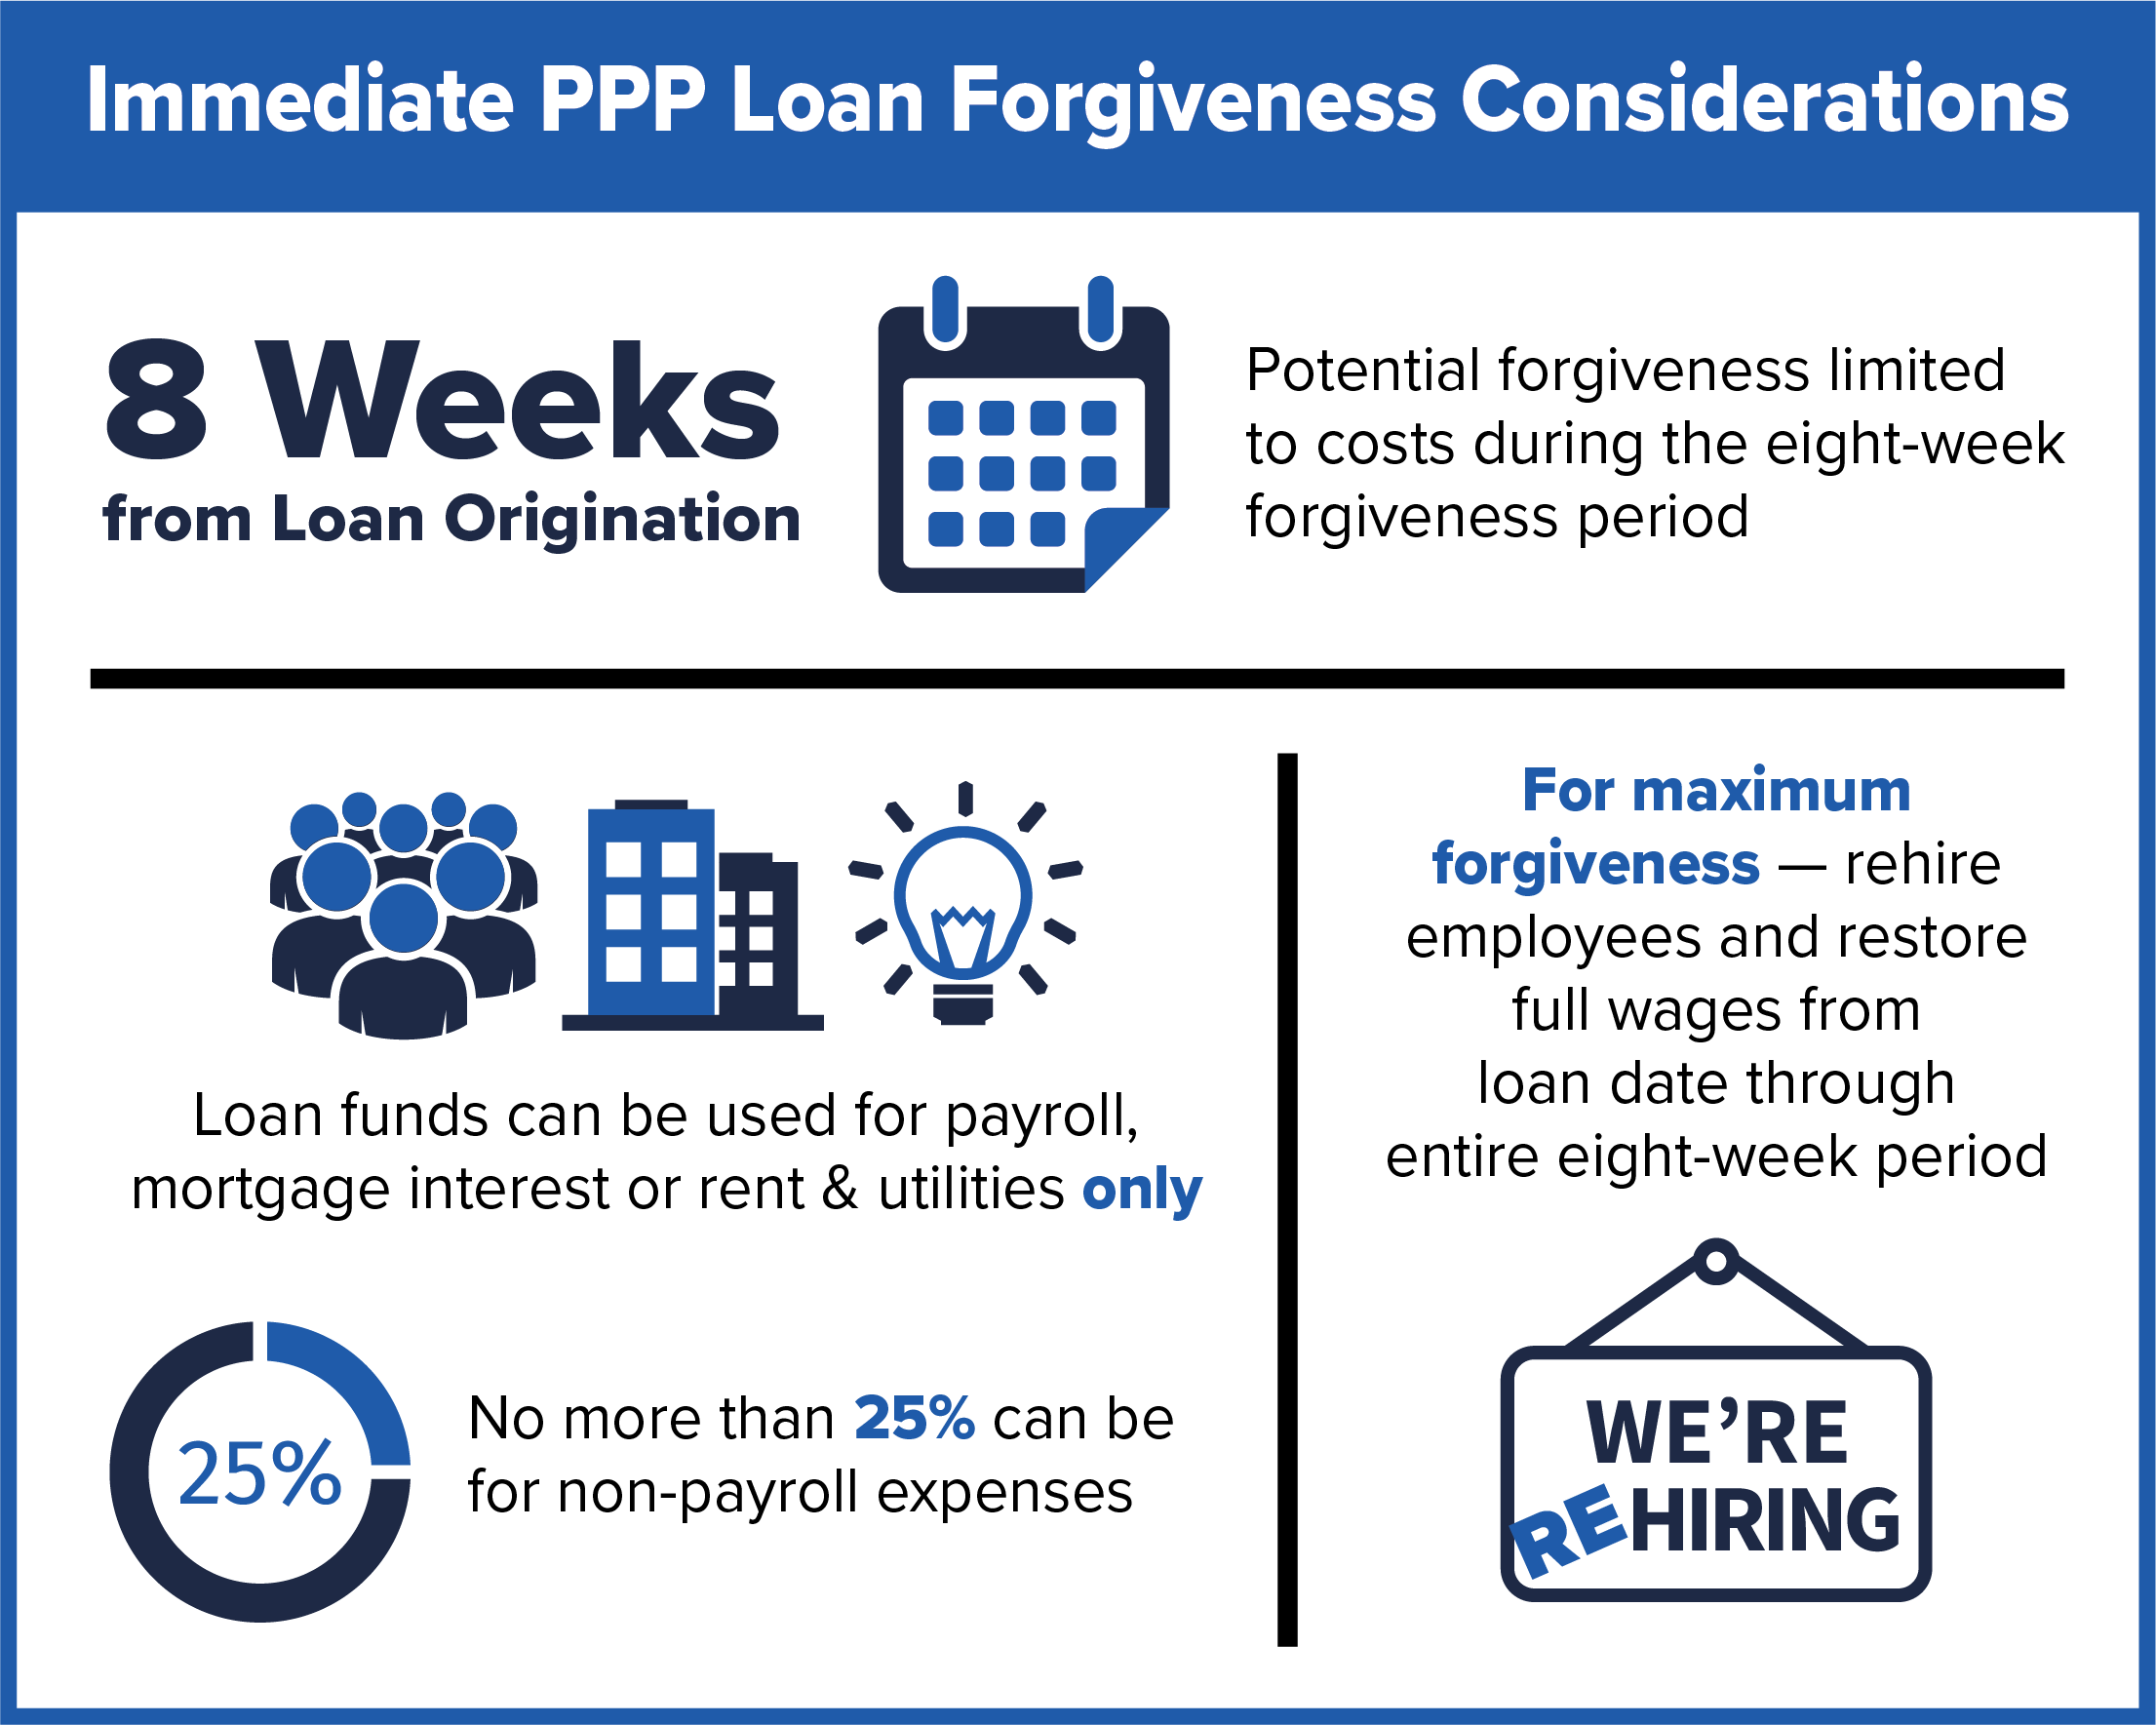 Immediate PPP Considerations Graphic